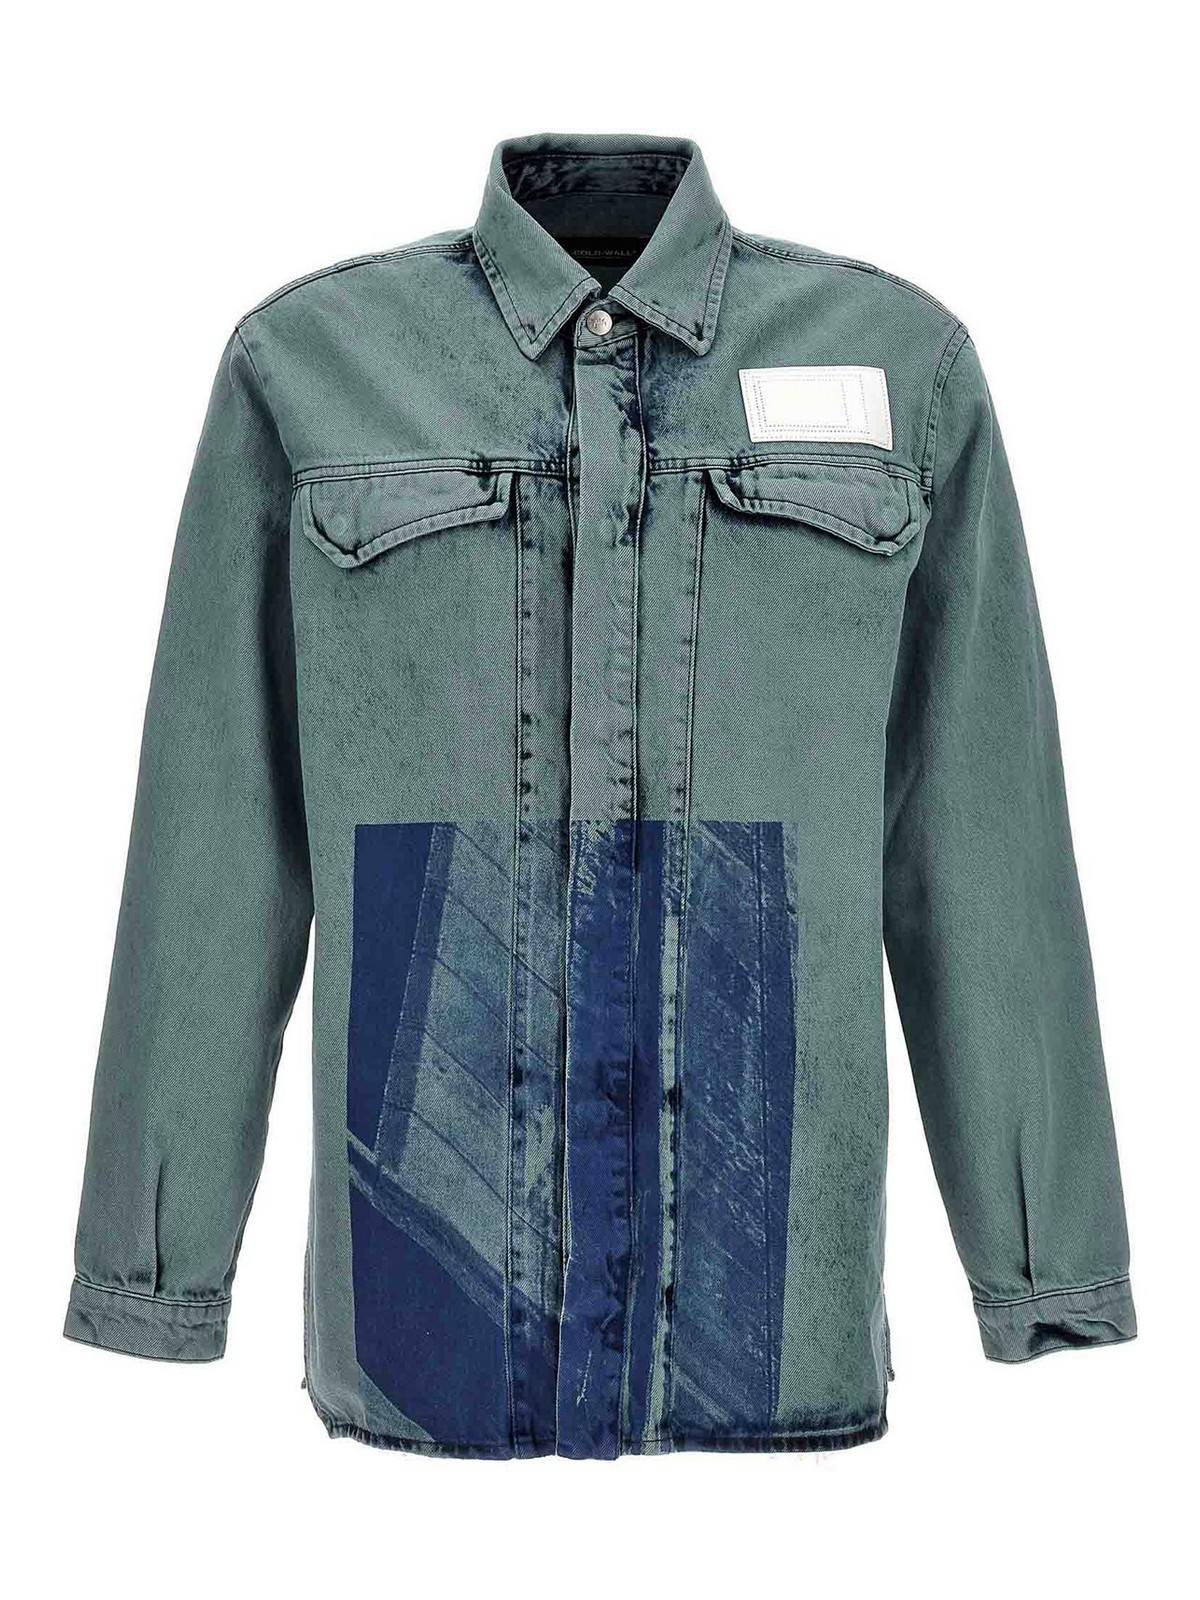 Shop A-cold-wall* Bleached Overdyed Shirt In Azul Claro